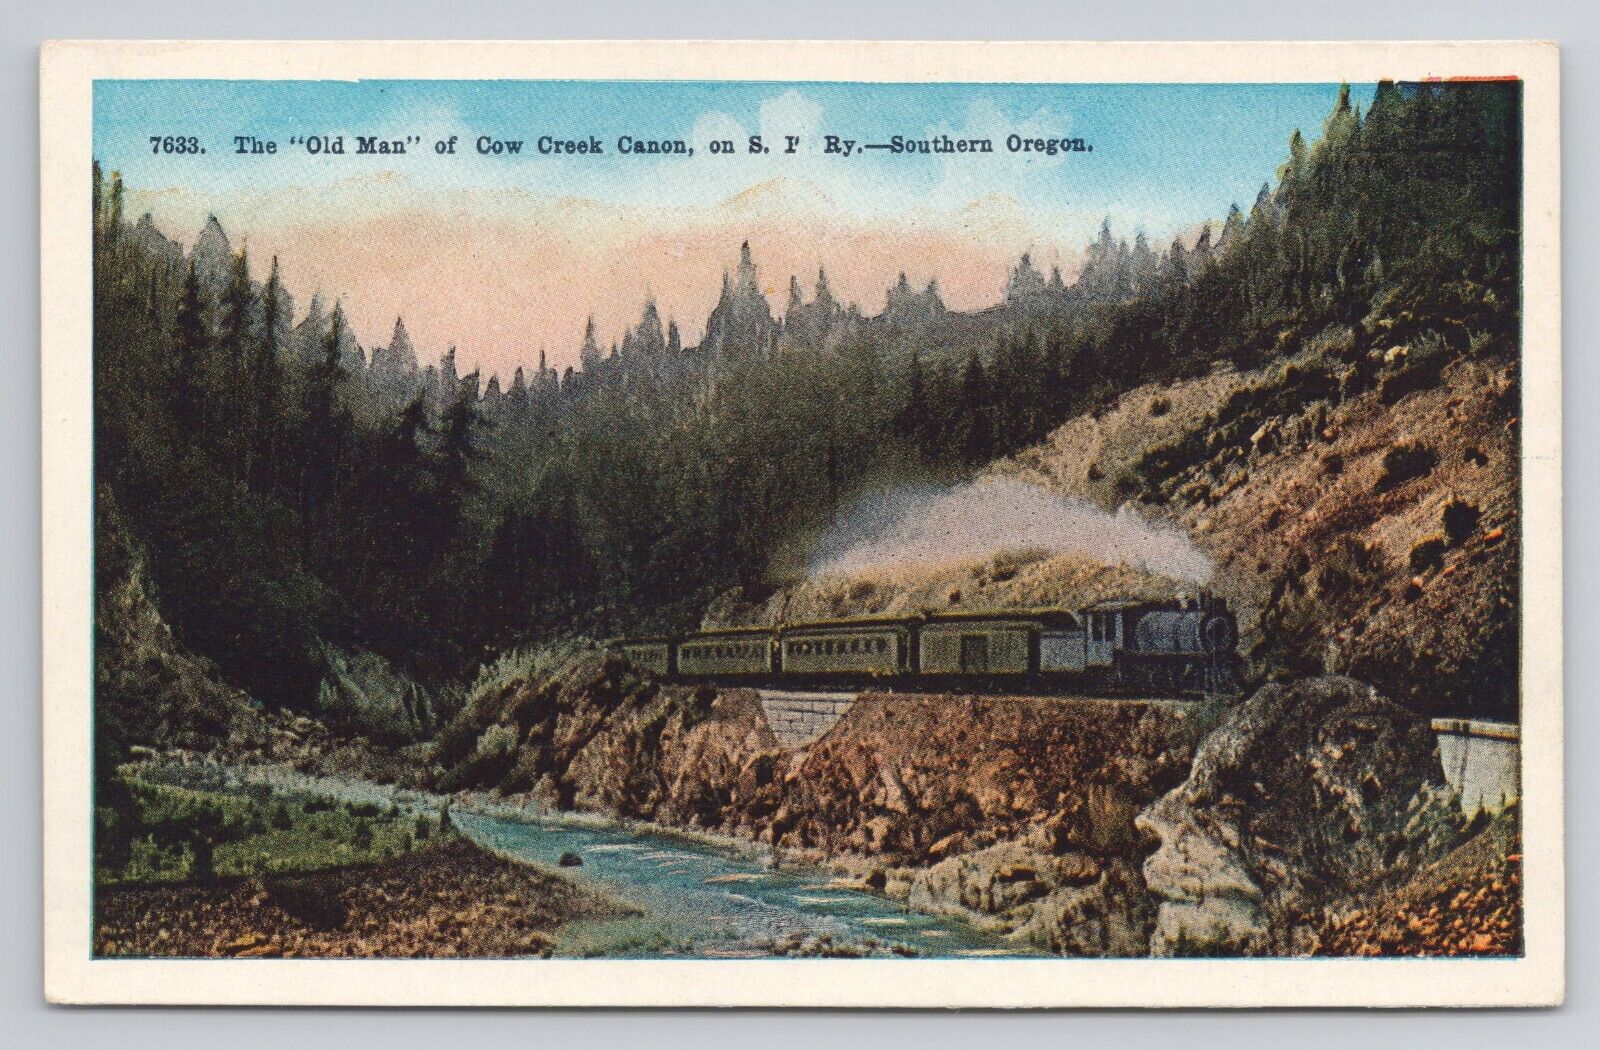 Postcard The Old Man of Cow Creek Canon on S IF Ry Southern Oregon